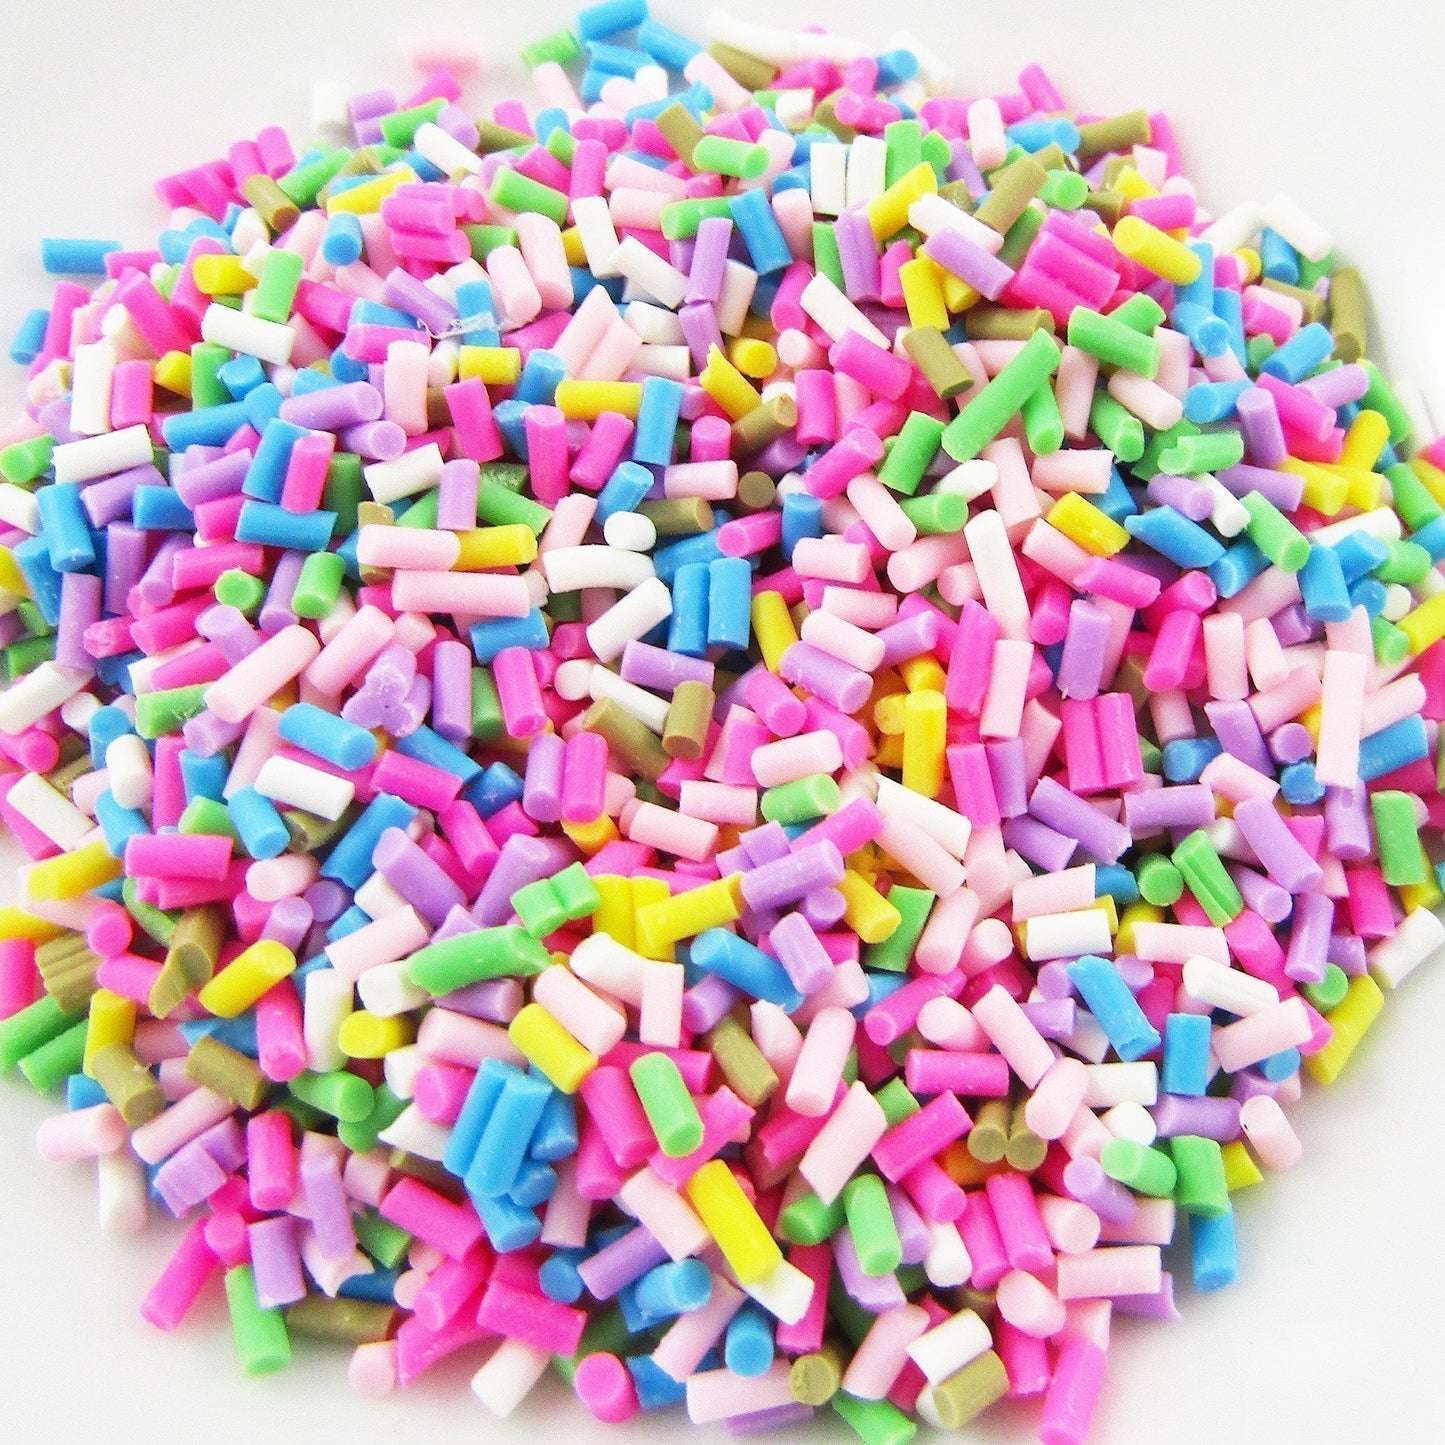 20g Polymer Clay Brights 100's & 1000's Sprinkles Add to Polymer Clay Resin etc